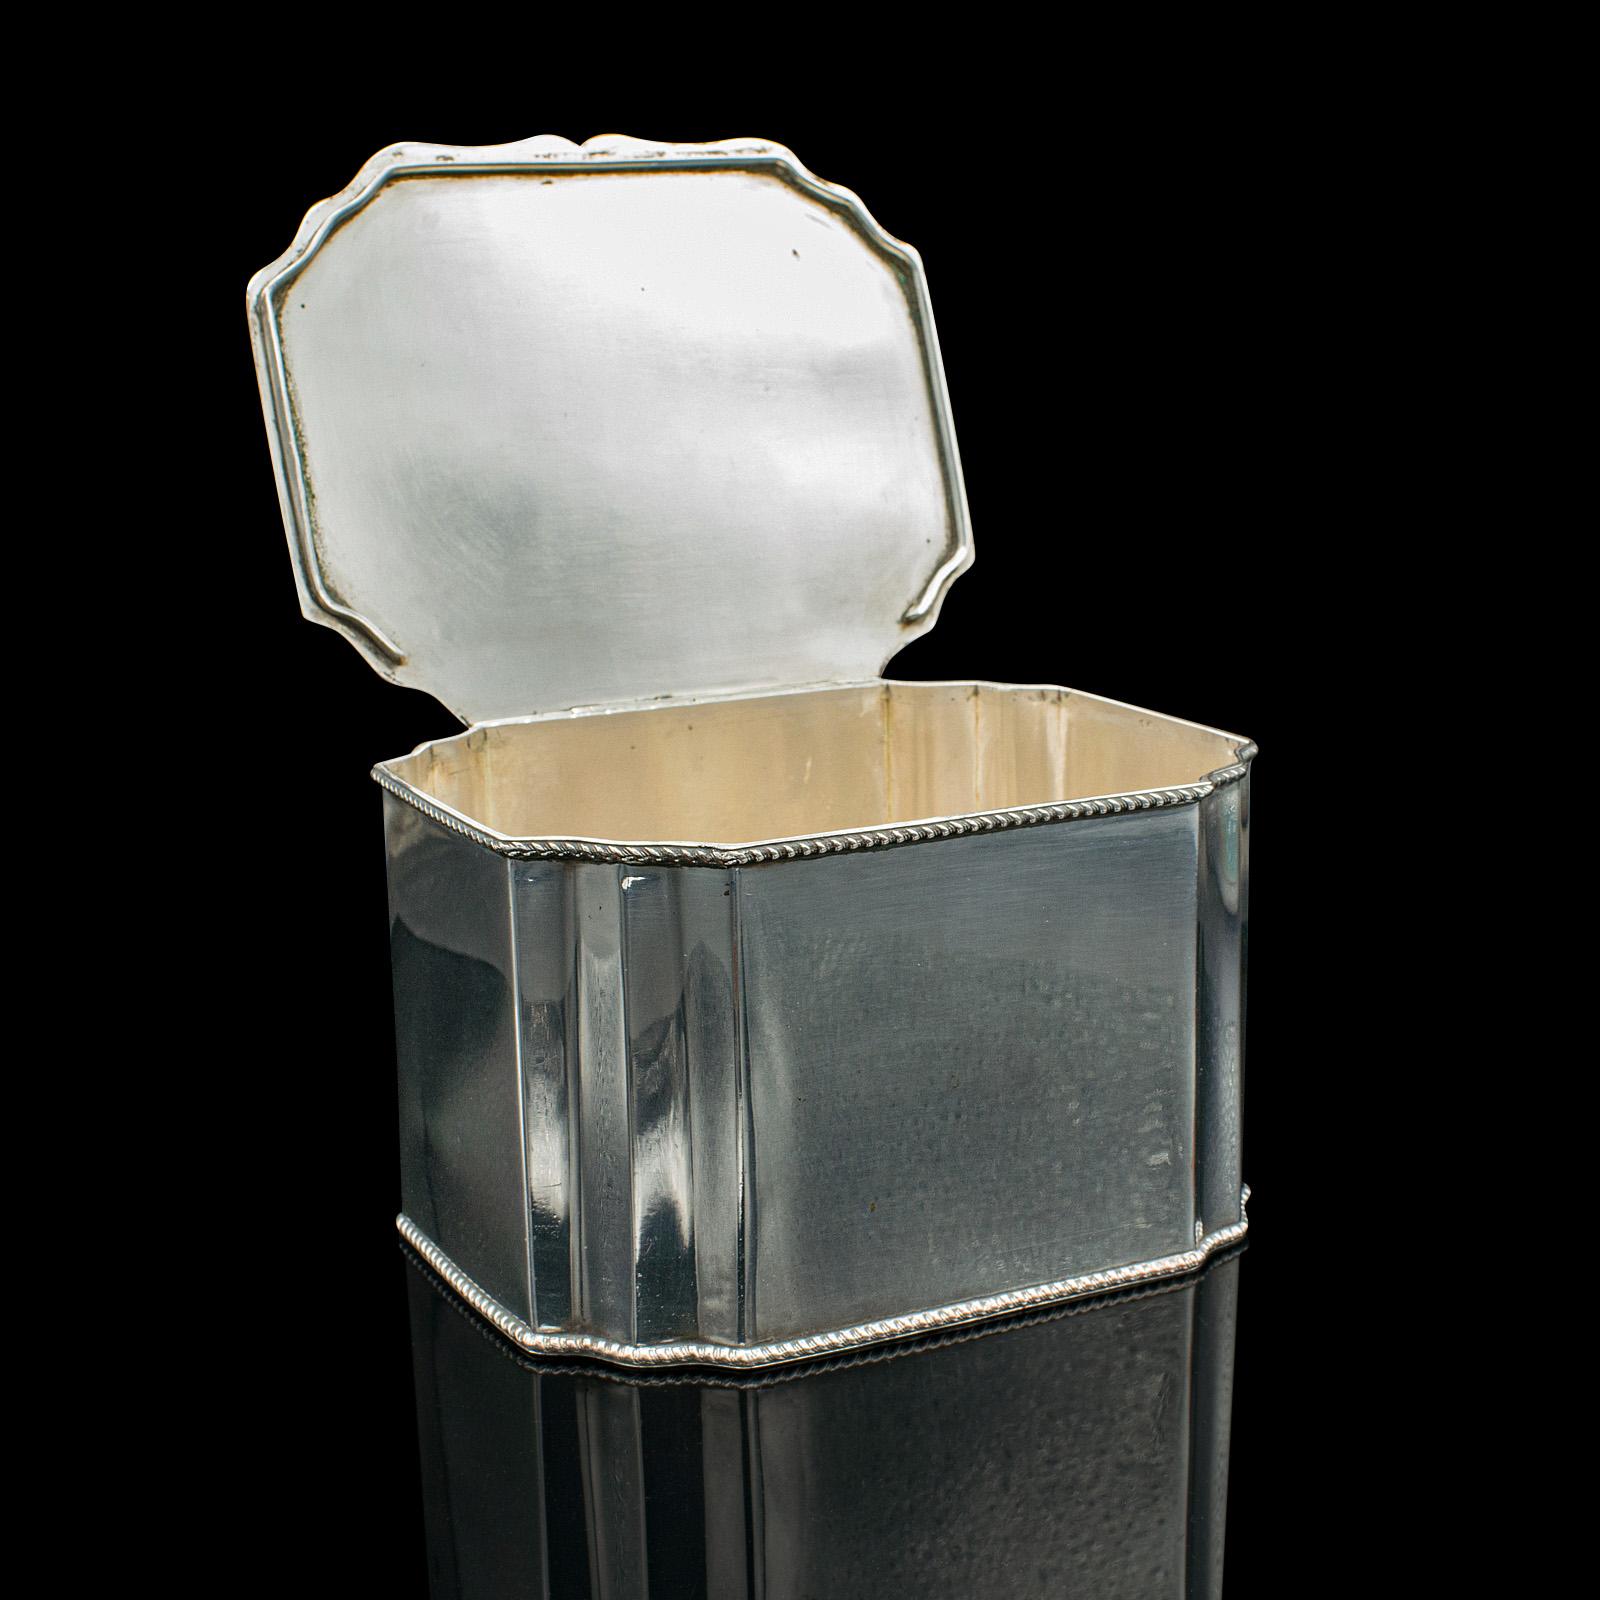 This is an antique tiffin box. An English, silver plated tea caddy, dating to the Edwardian period, circa 1910.

Appealing Edwardian box or caddy with a bright appearance
Displays a desirable aged patina and in good order
Silver plating presents